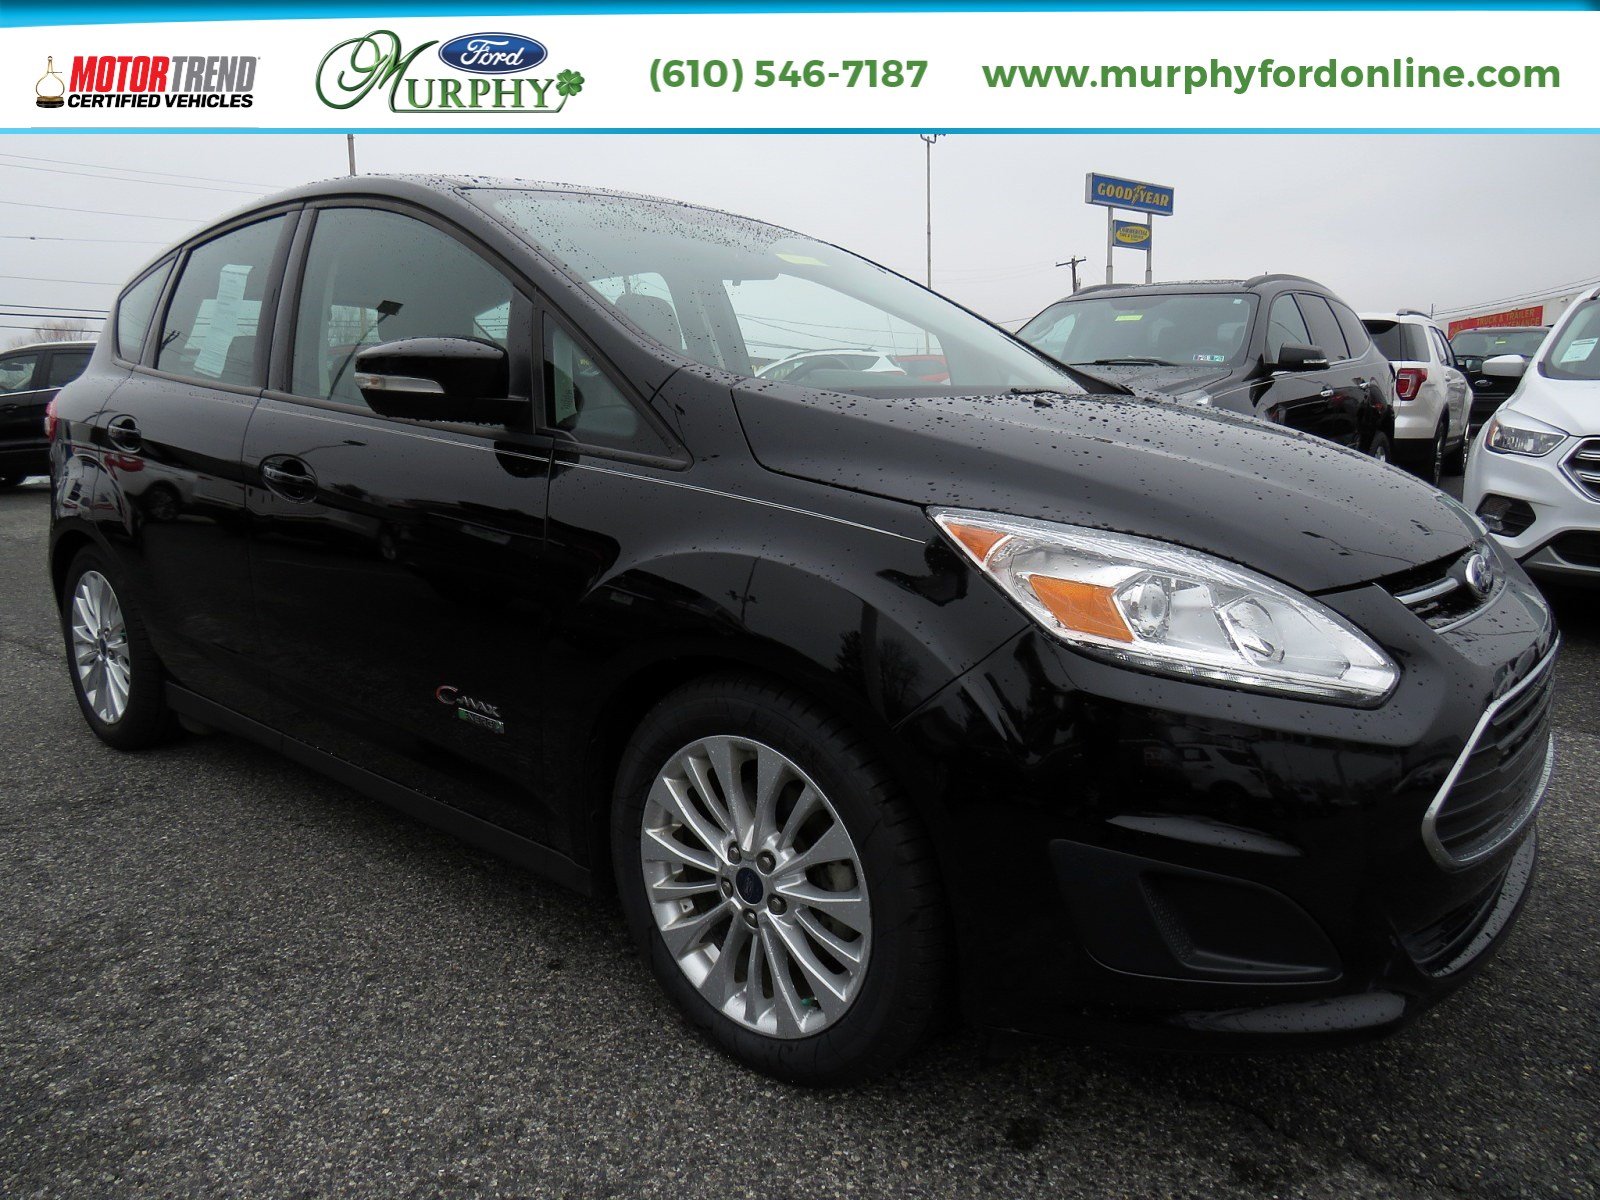 Used 17 Ford C Max Energi For Sale At Murphy Ford Vin 1fadp5eu1hl1150